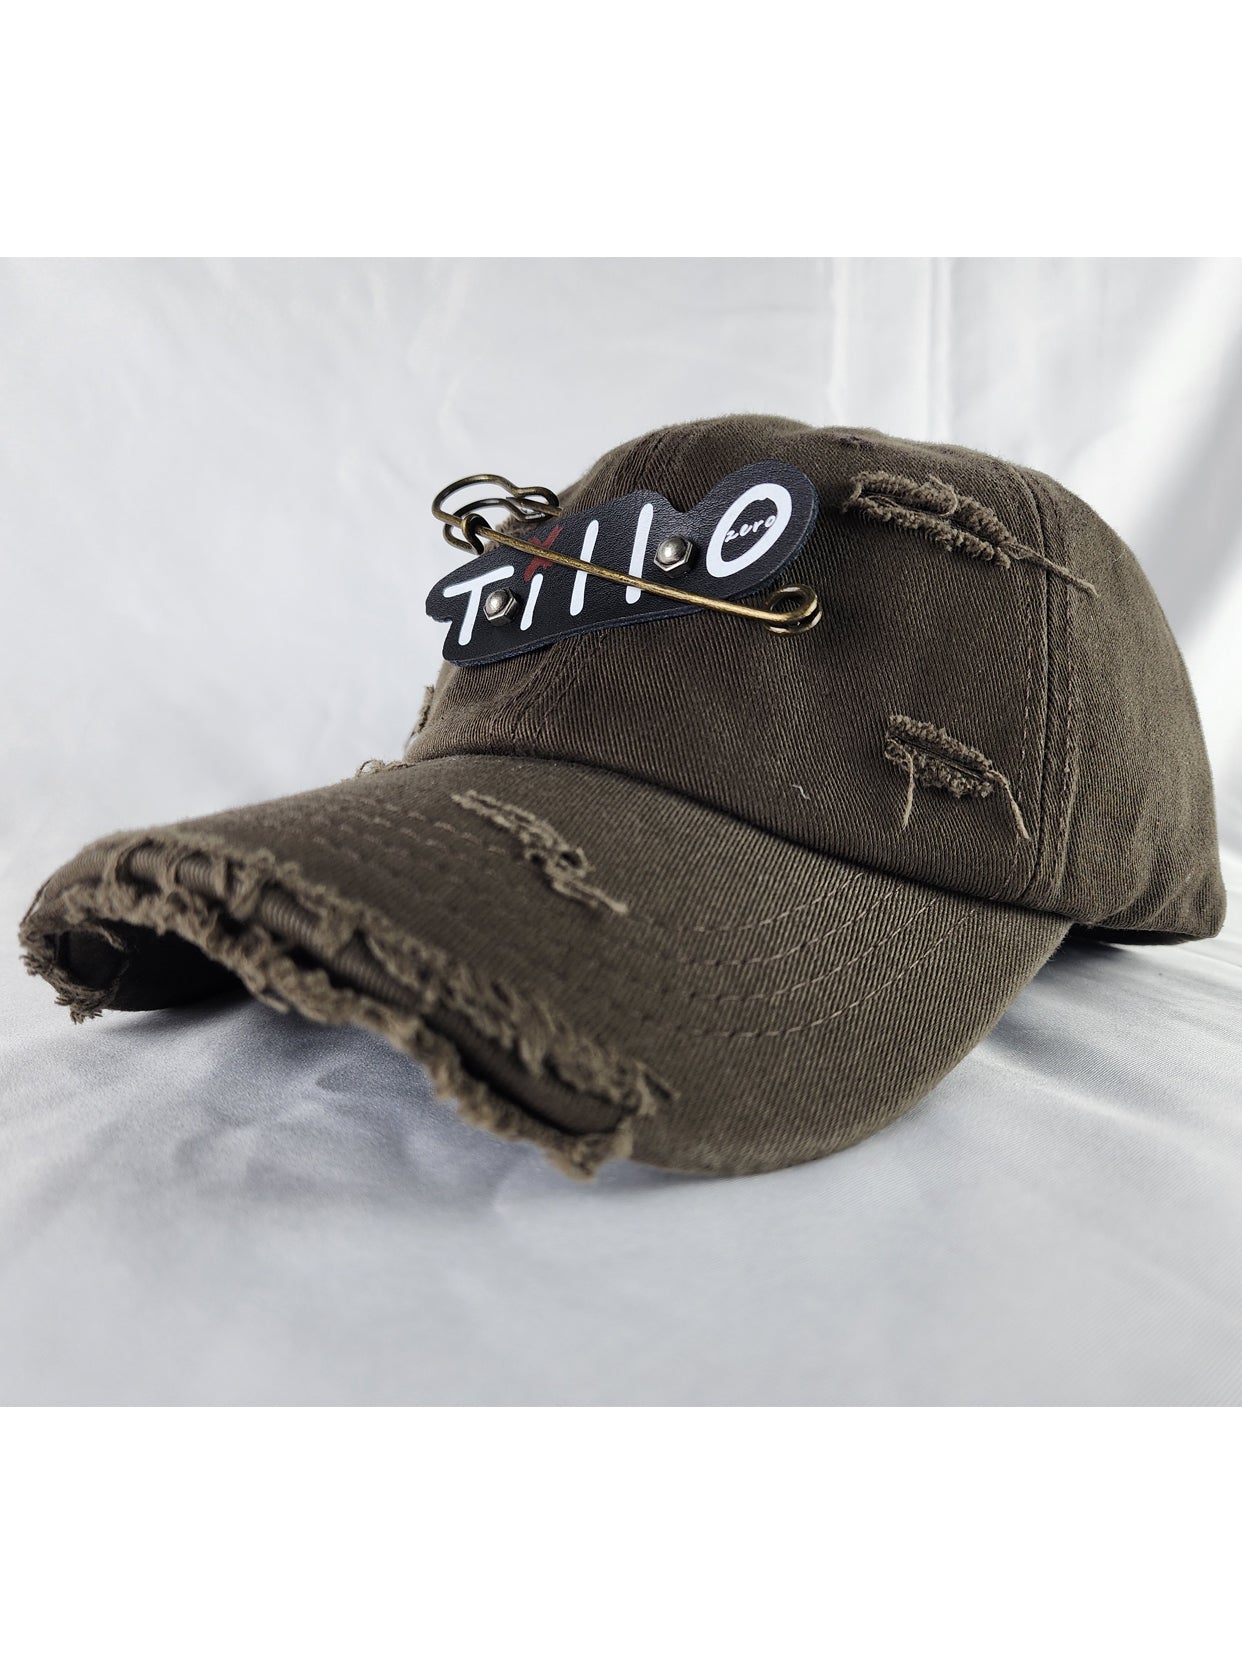 Leather Lable Distressed Cap